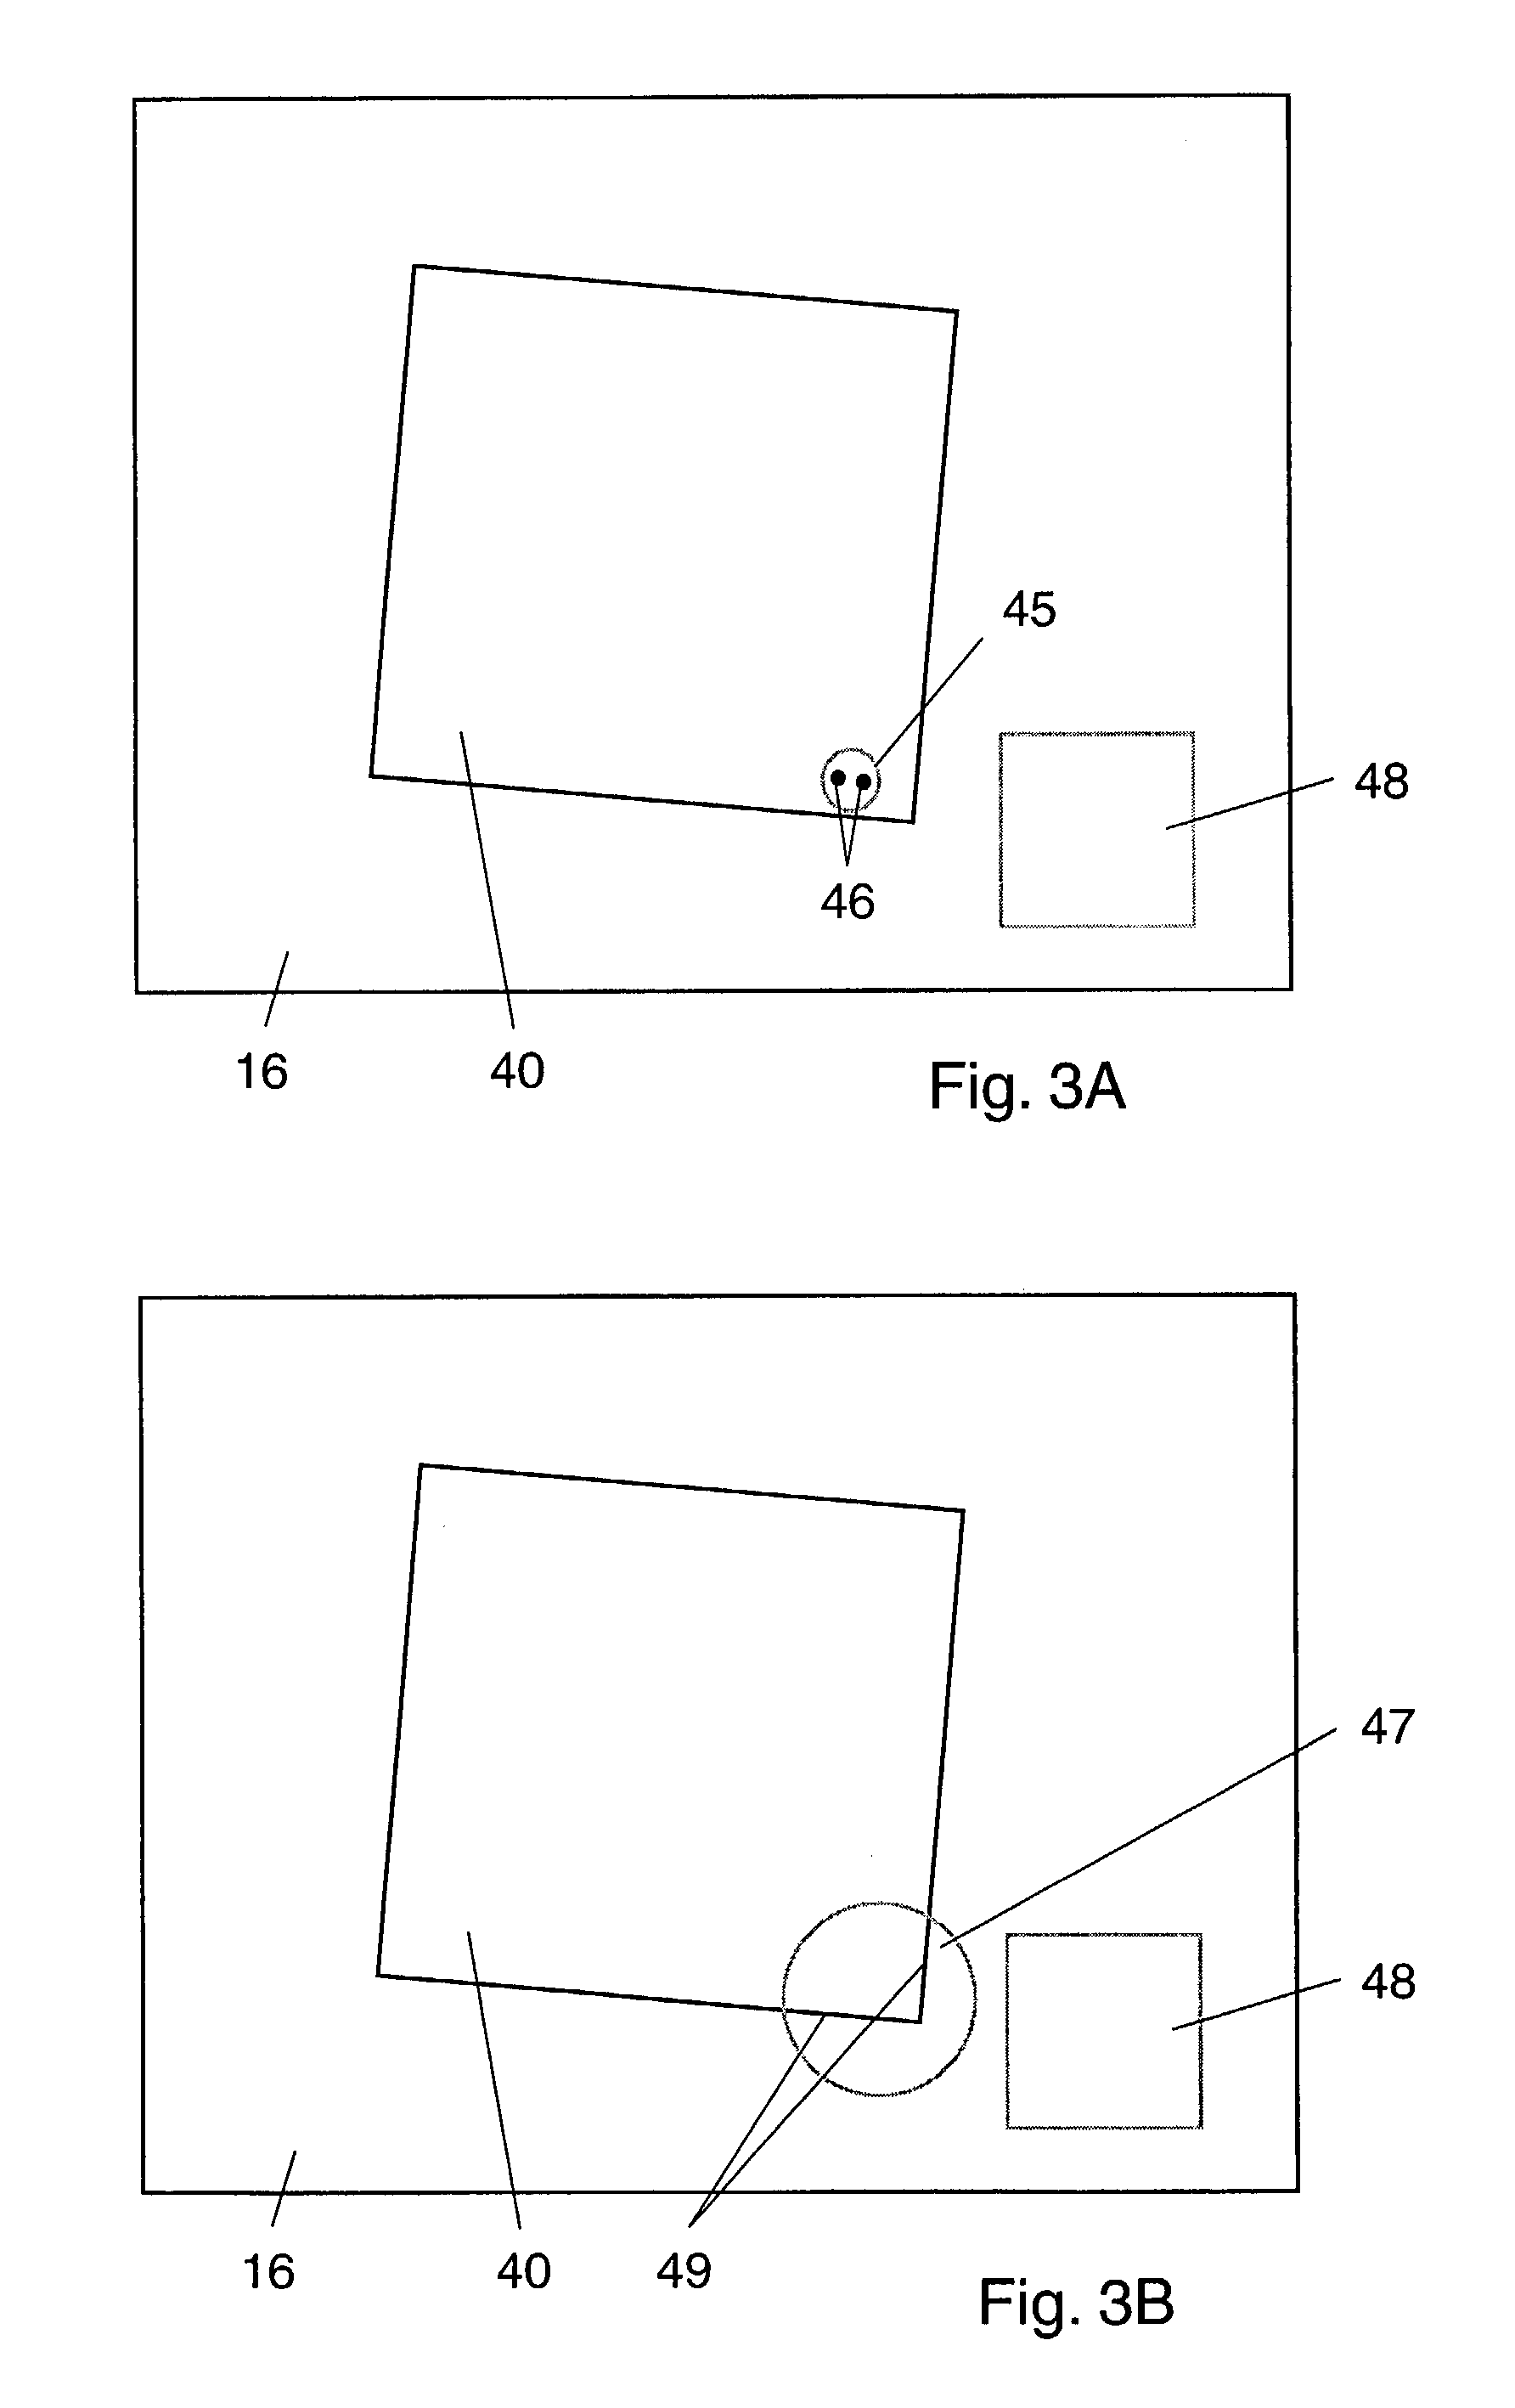 Method for preparing graphics on sheets